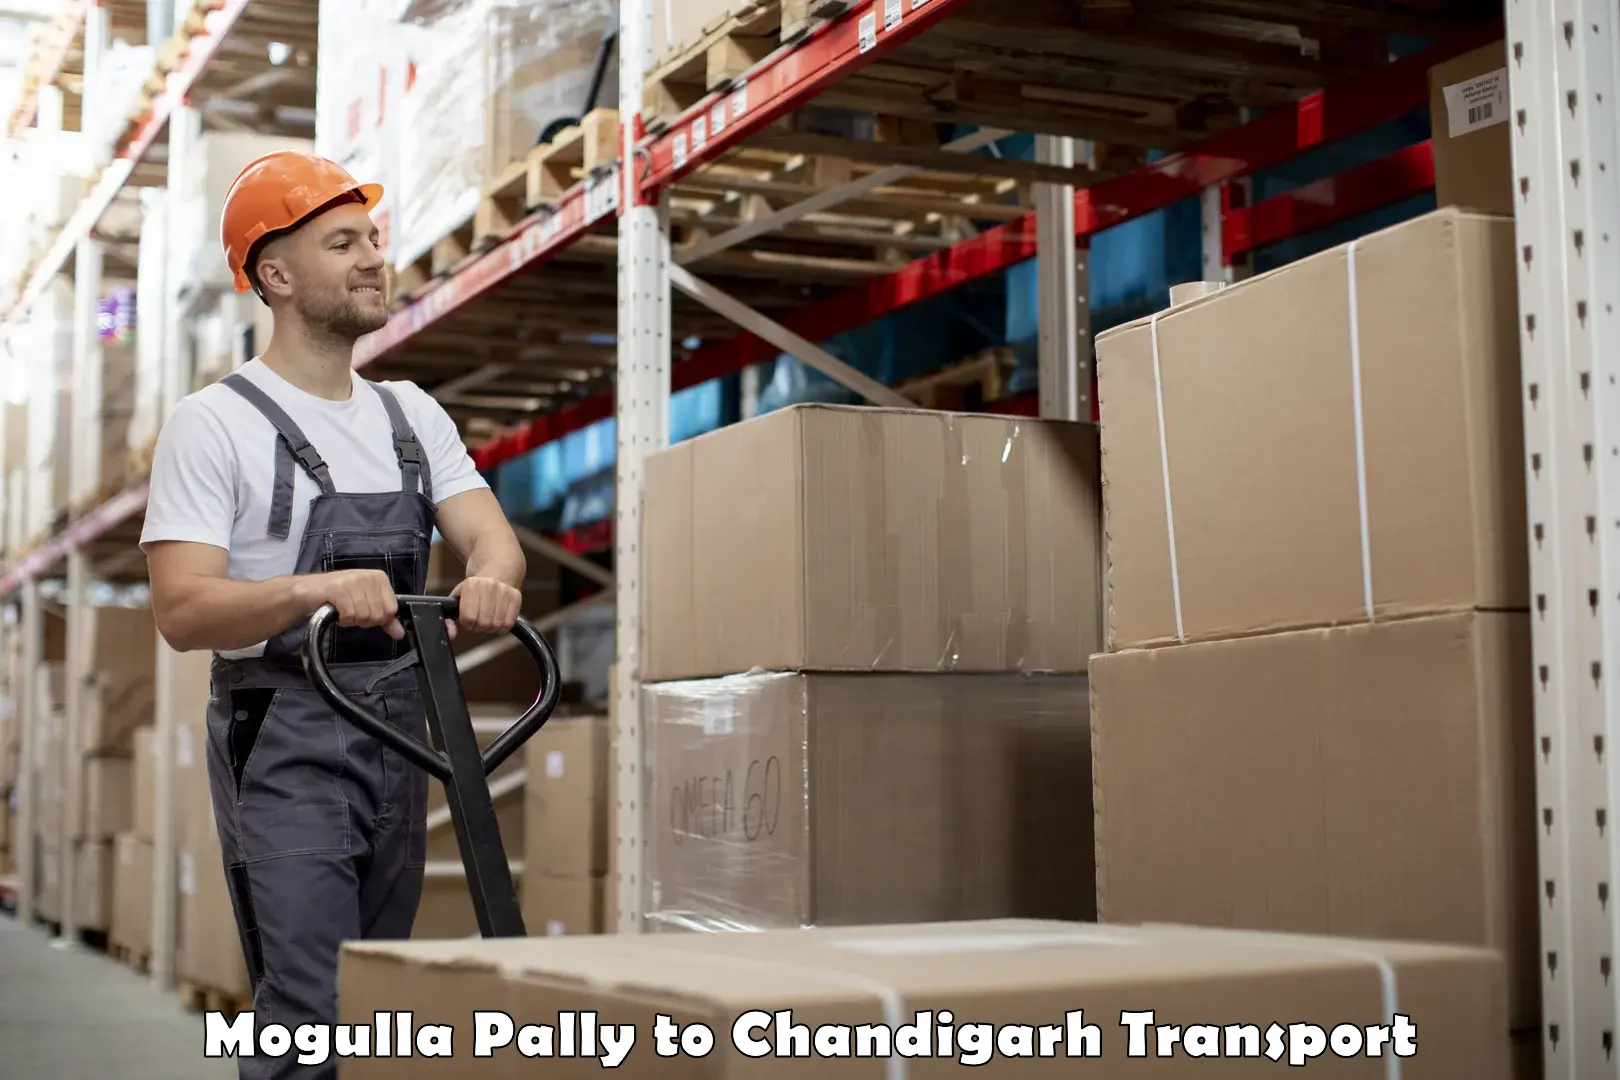 Goods delivery service Mogulla Pally to Chandigarh